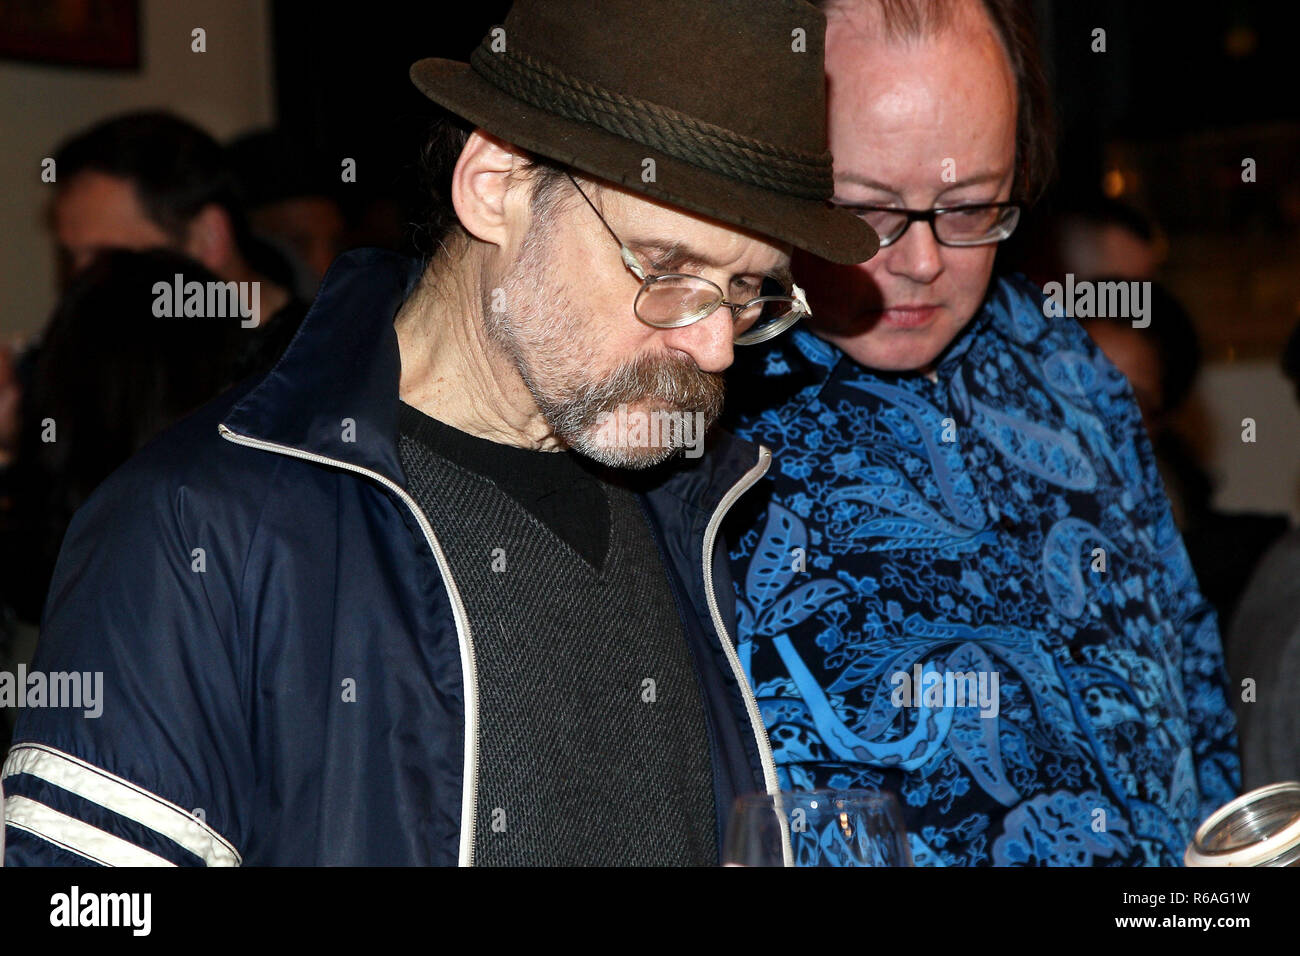 NEW YORK, NY - FEBRUARY 03:  The notorious party crashers, Robert Stepanek and Peter Hargrove zero in on food and drinks at A Taste of Dum Pukht by Chef Gaurav Anand at Awadh on February 3, 2016 in New York City.  (Photo by Steve Mack/S.D. Mack Pictures) Stock Photo